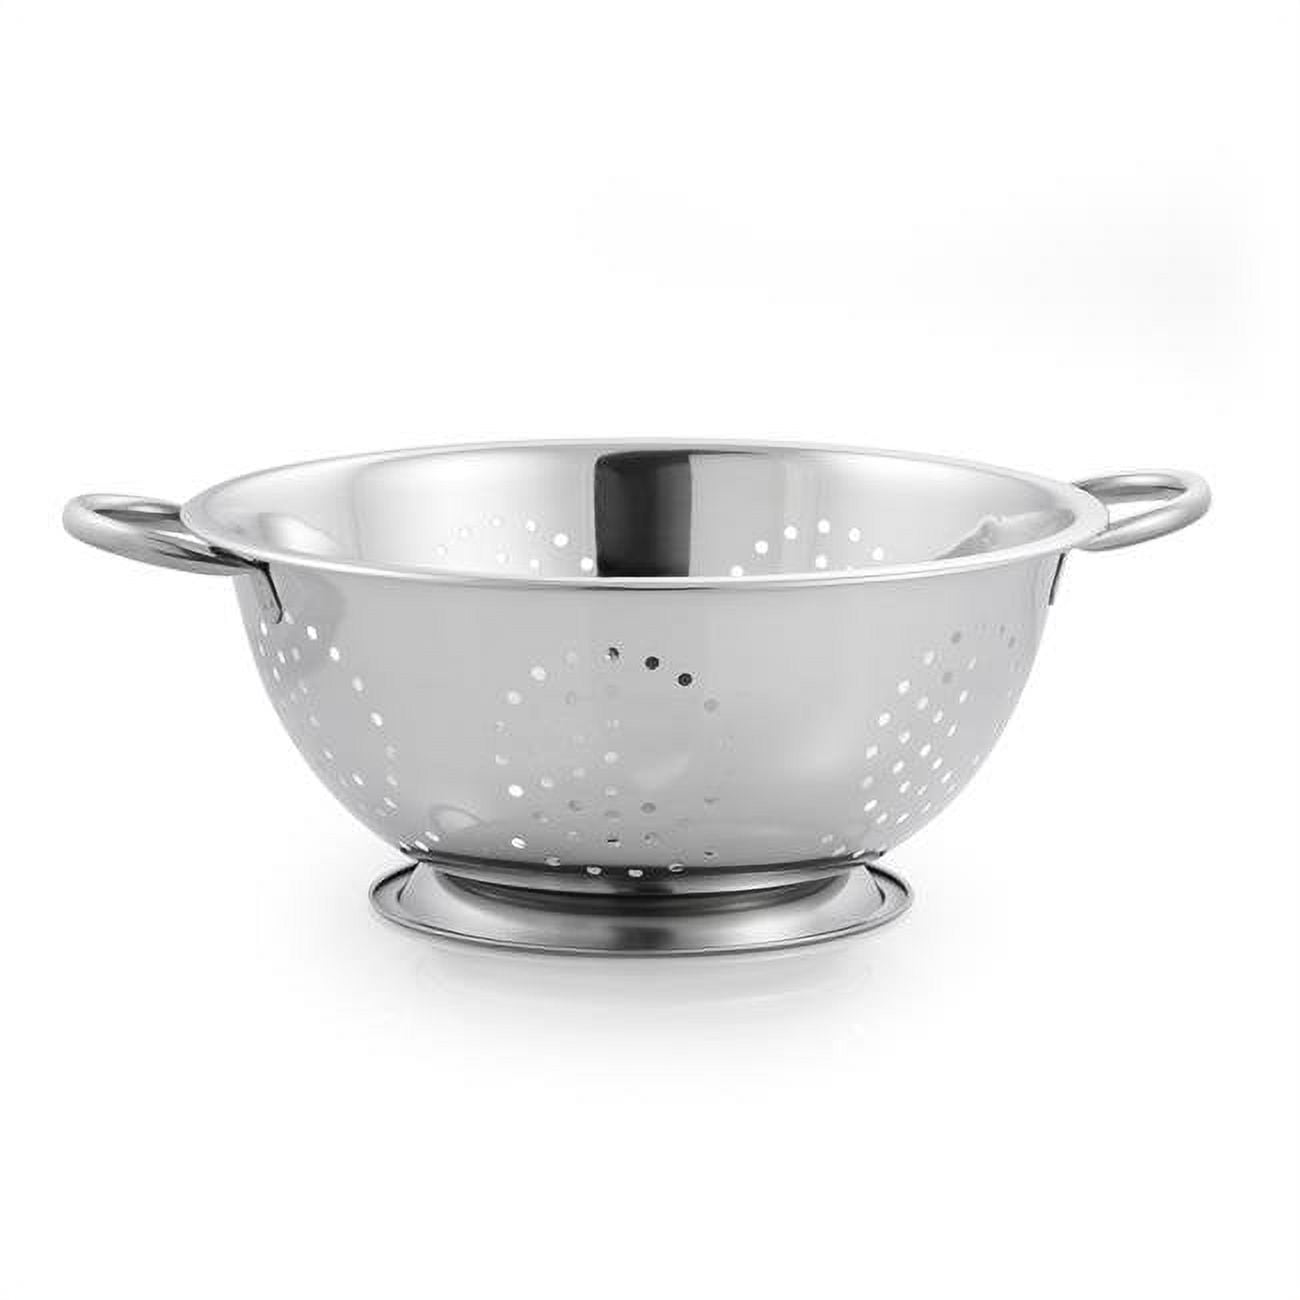 Picture of McSunley 6018296 11 x 13.5 in. Stainless Steel Deep Design Colander, Silver